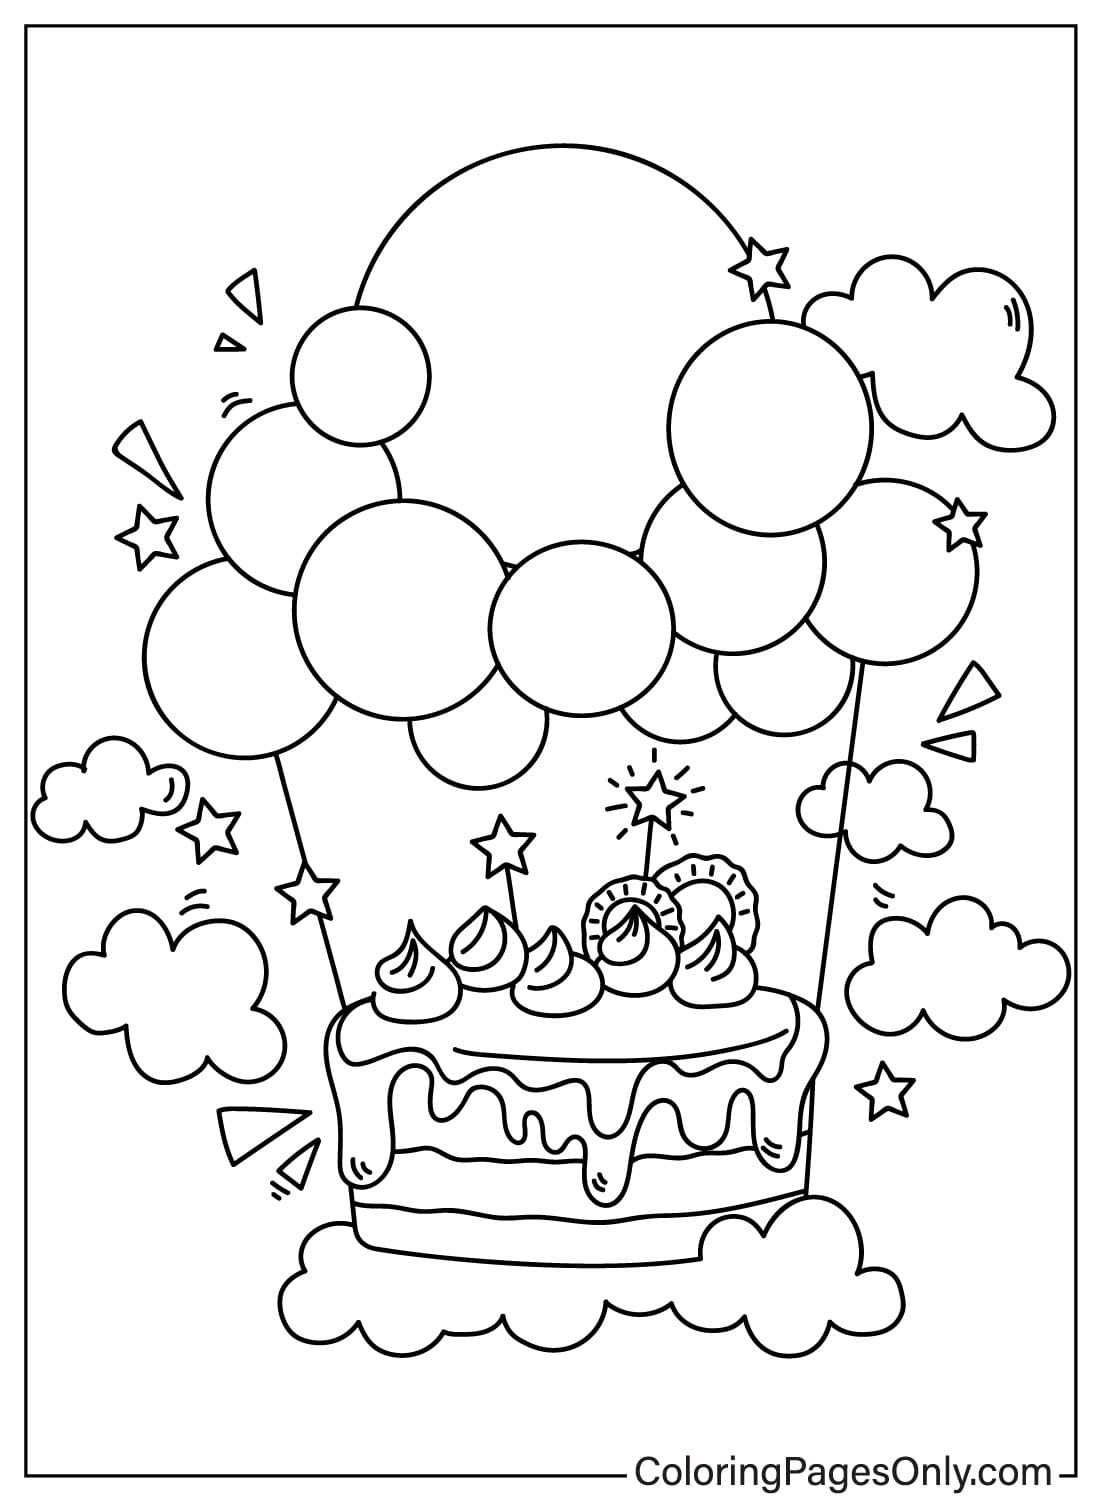 Drawing Birthday Cake Coloring Page from Birthday Cake